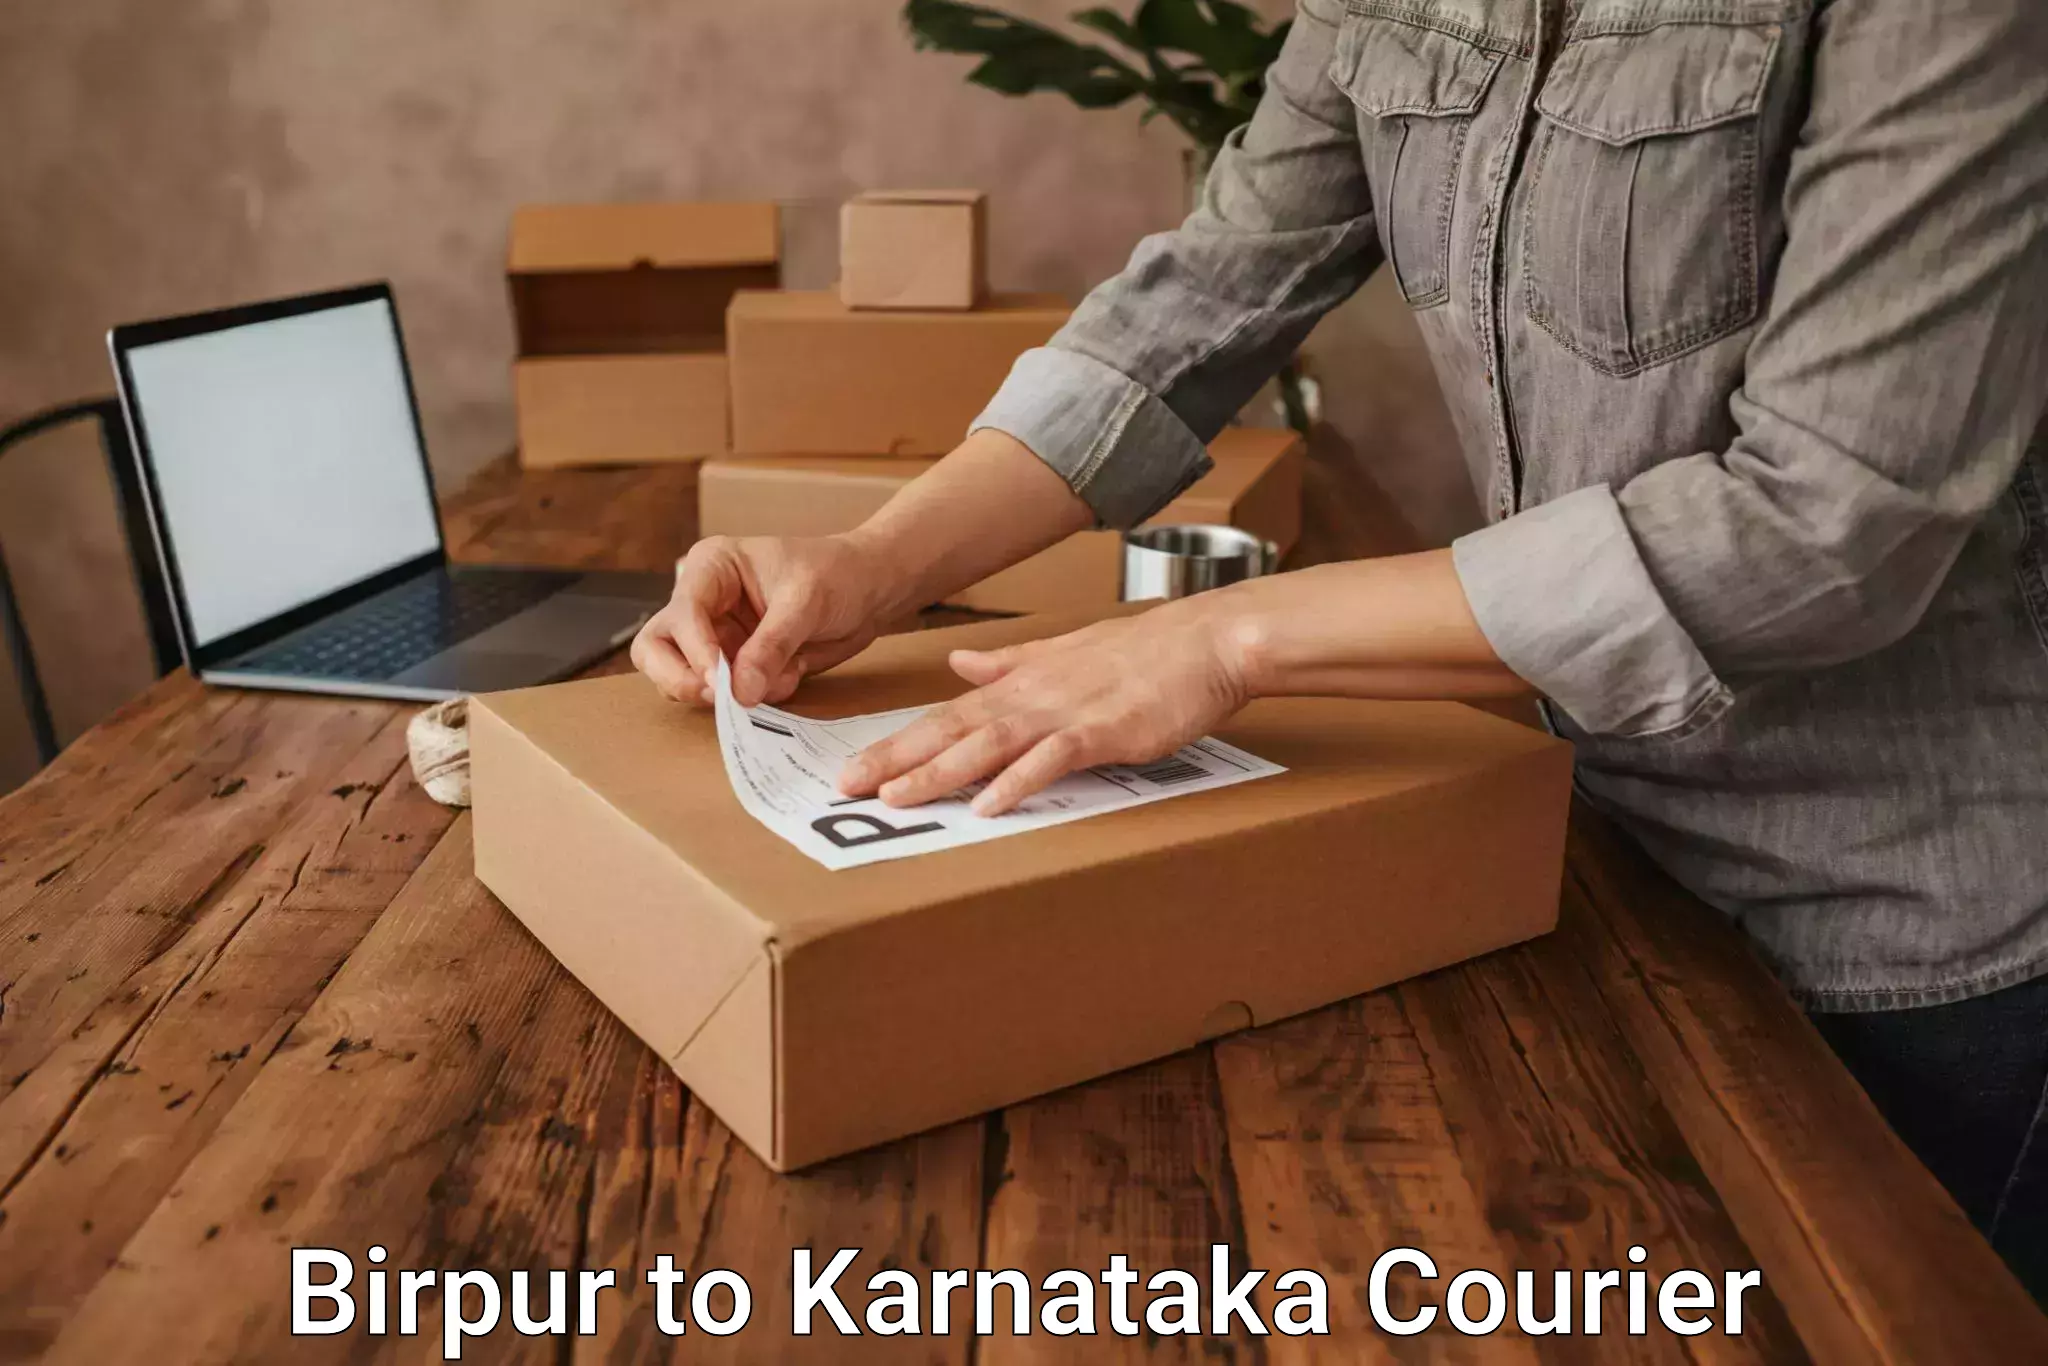 Furniture delivery service Birpur to Maddur